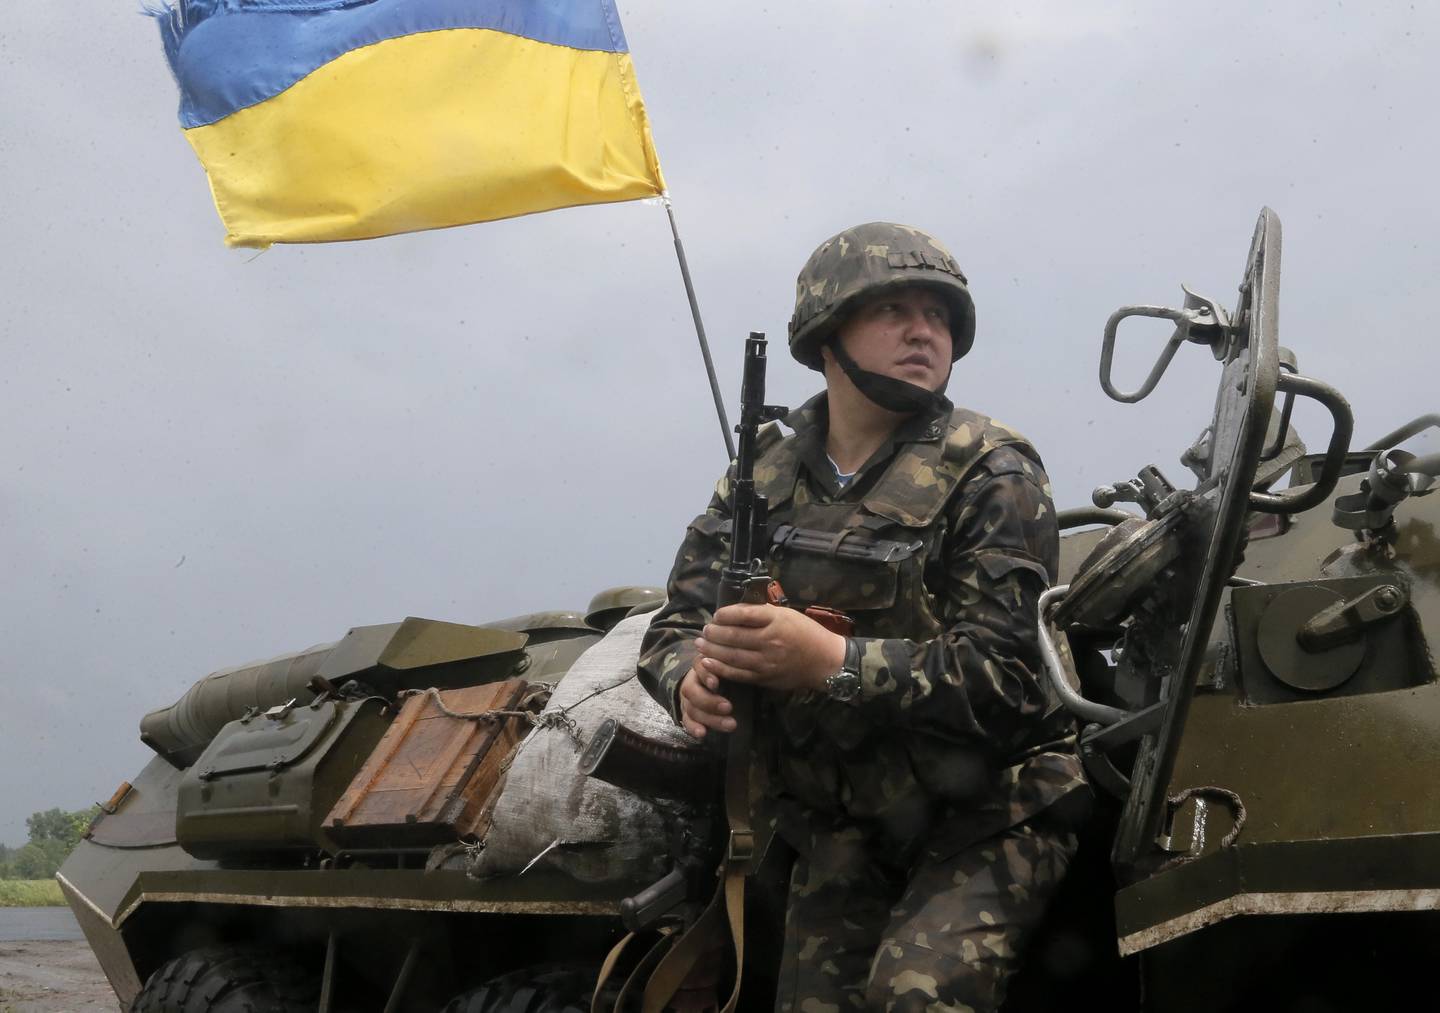 A Ukrainian soldier takes position during a battle with pro-Russian separatist fighters in Slovyansk, Ukraine, Saturday, May 31, 2014. The Ukrainian Acting Defence Minister said on Friday that troops had ousted separatists from southern and western parts of the Donetsk region and north of the Luhansk region. (AP Photo/Efrem Lukatsky)